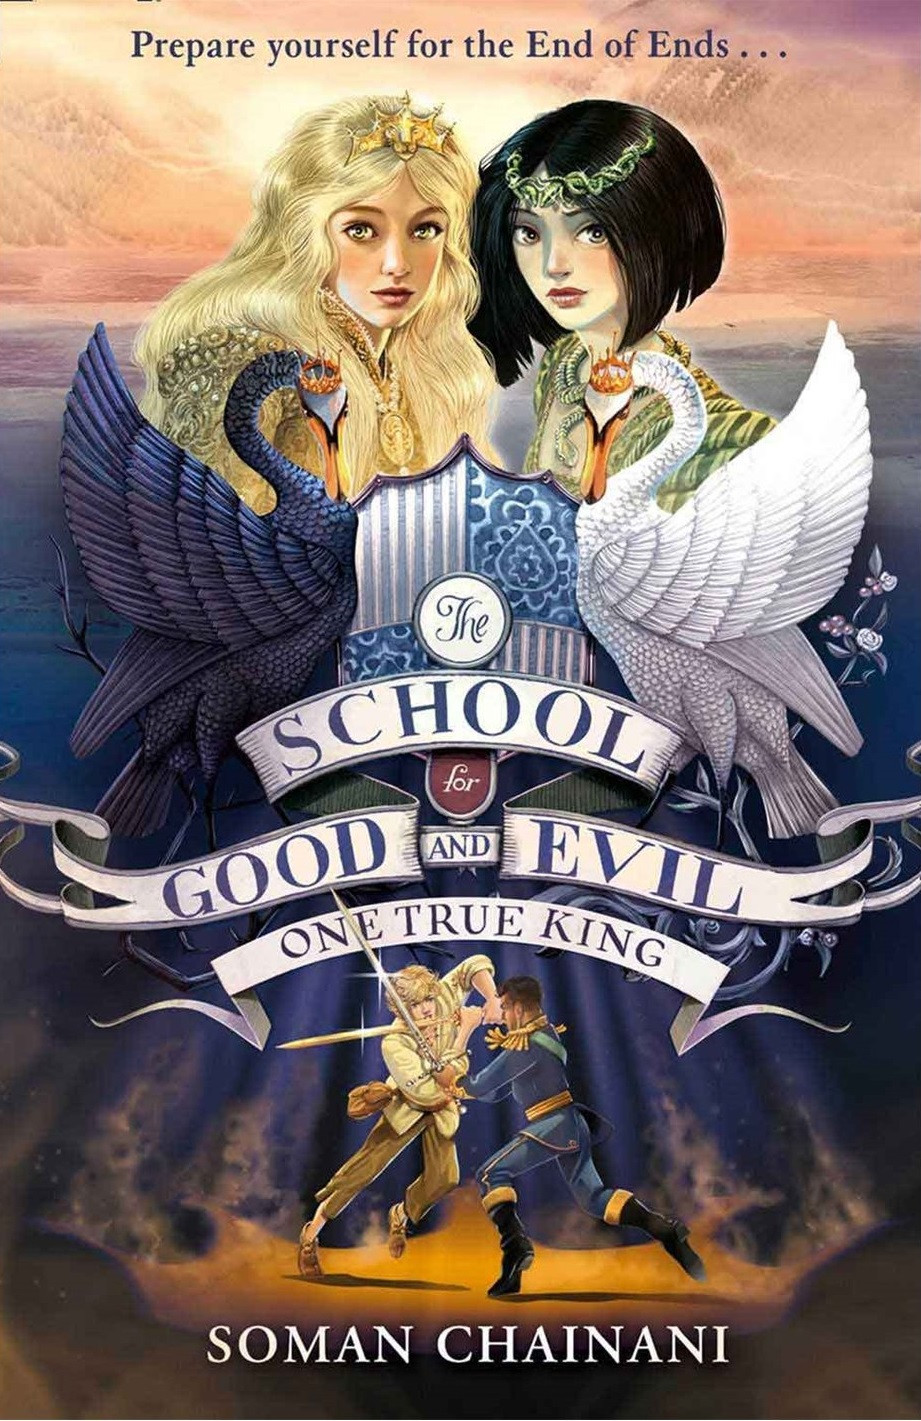 The school of evil for good and evil – One true king